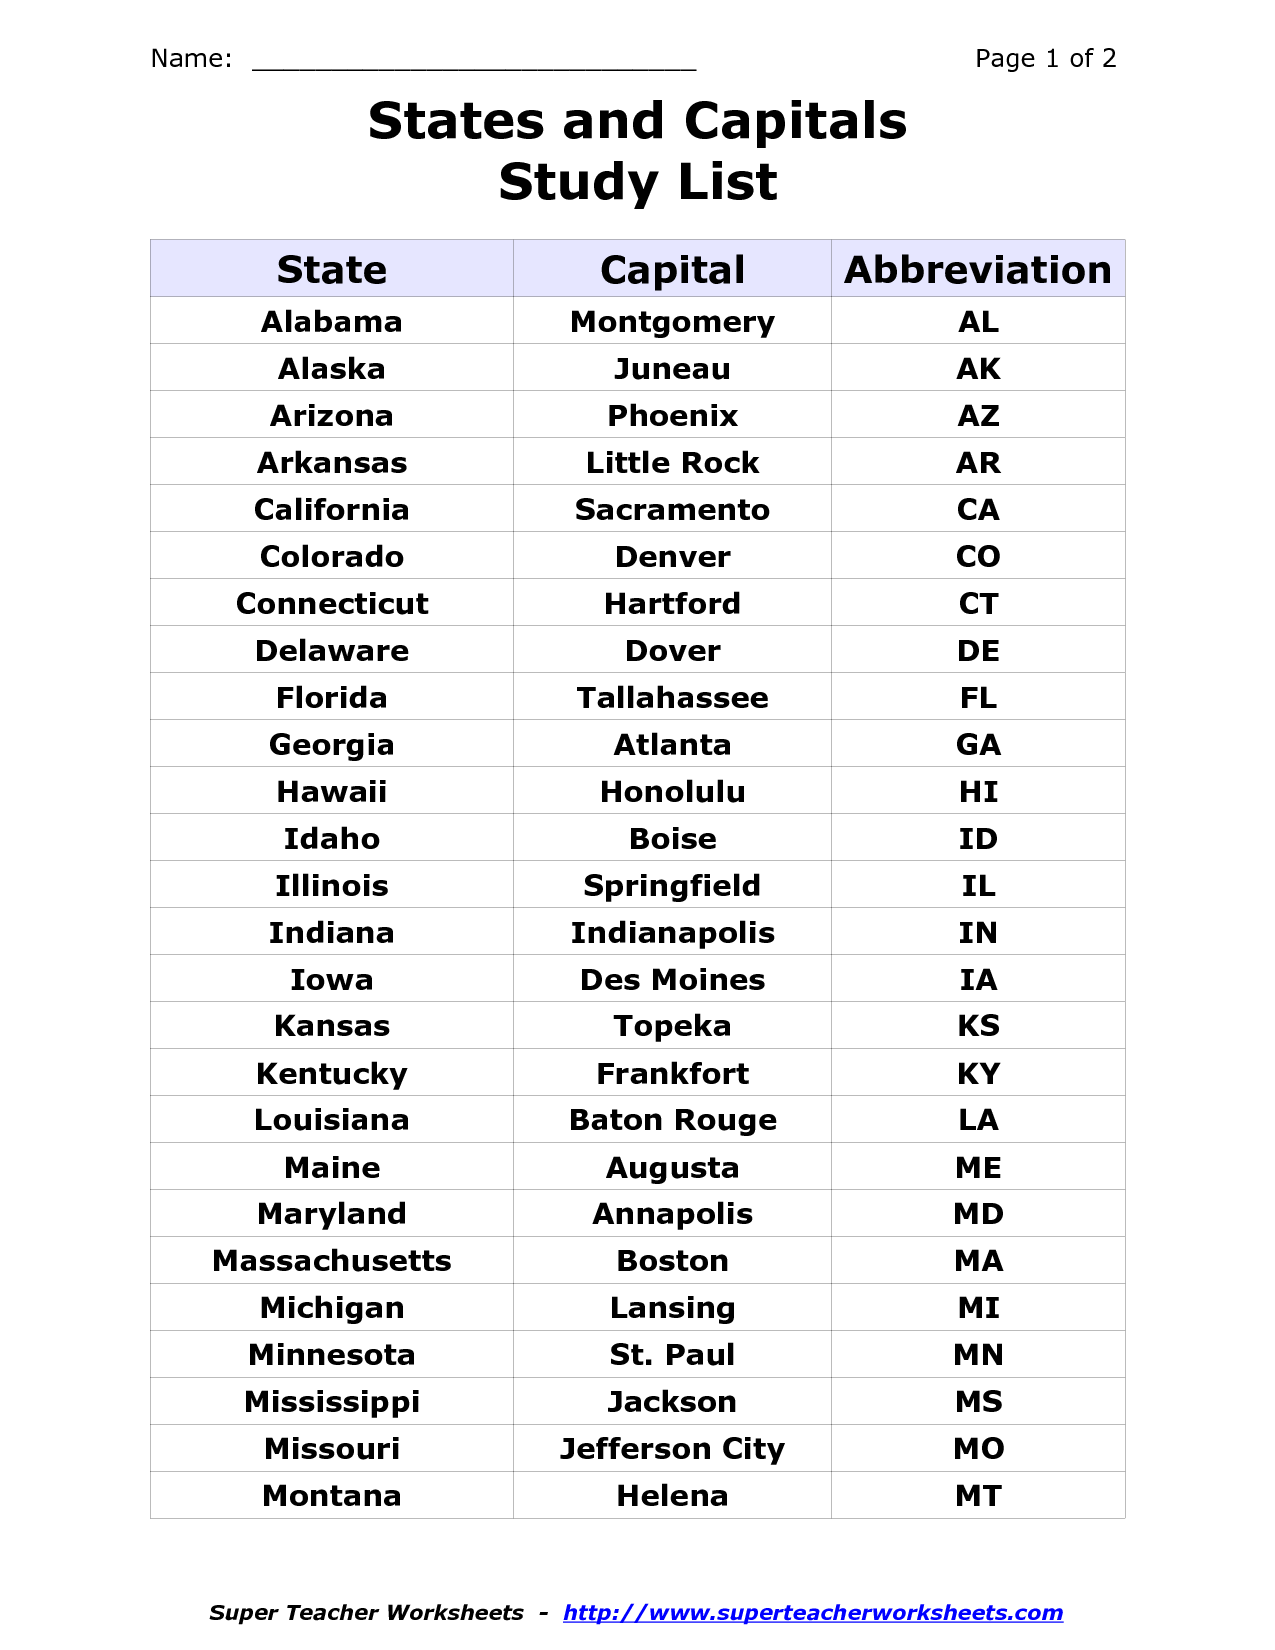 7 Best Images of States Capitals List Printable - 50 States Capitals ...